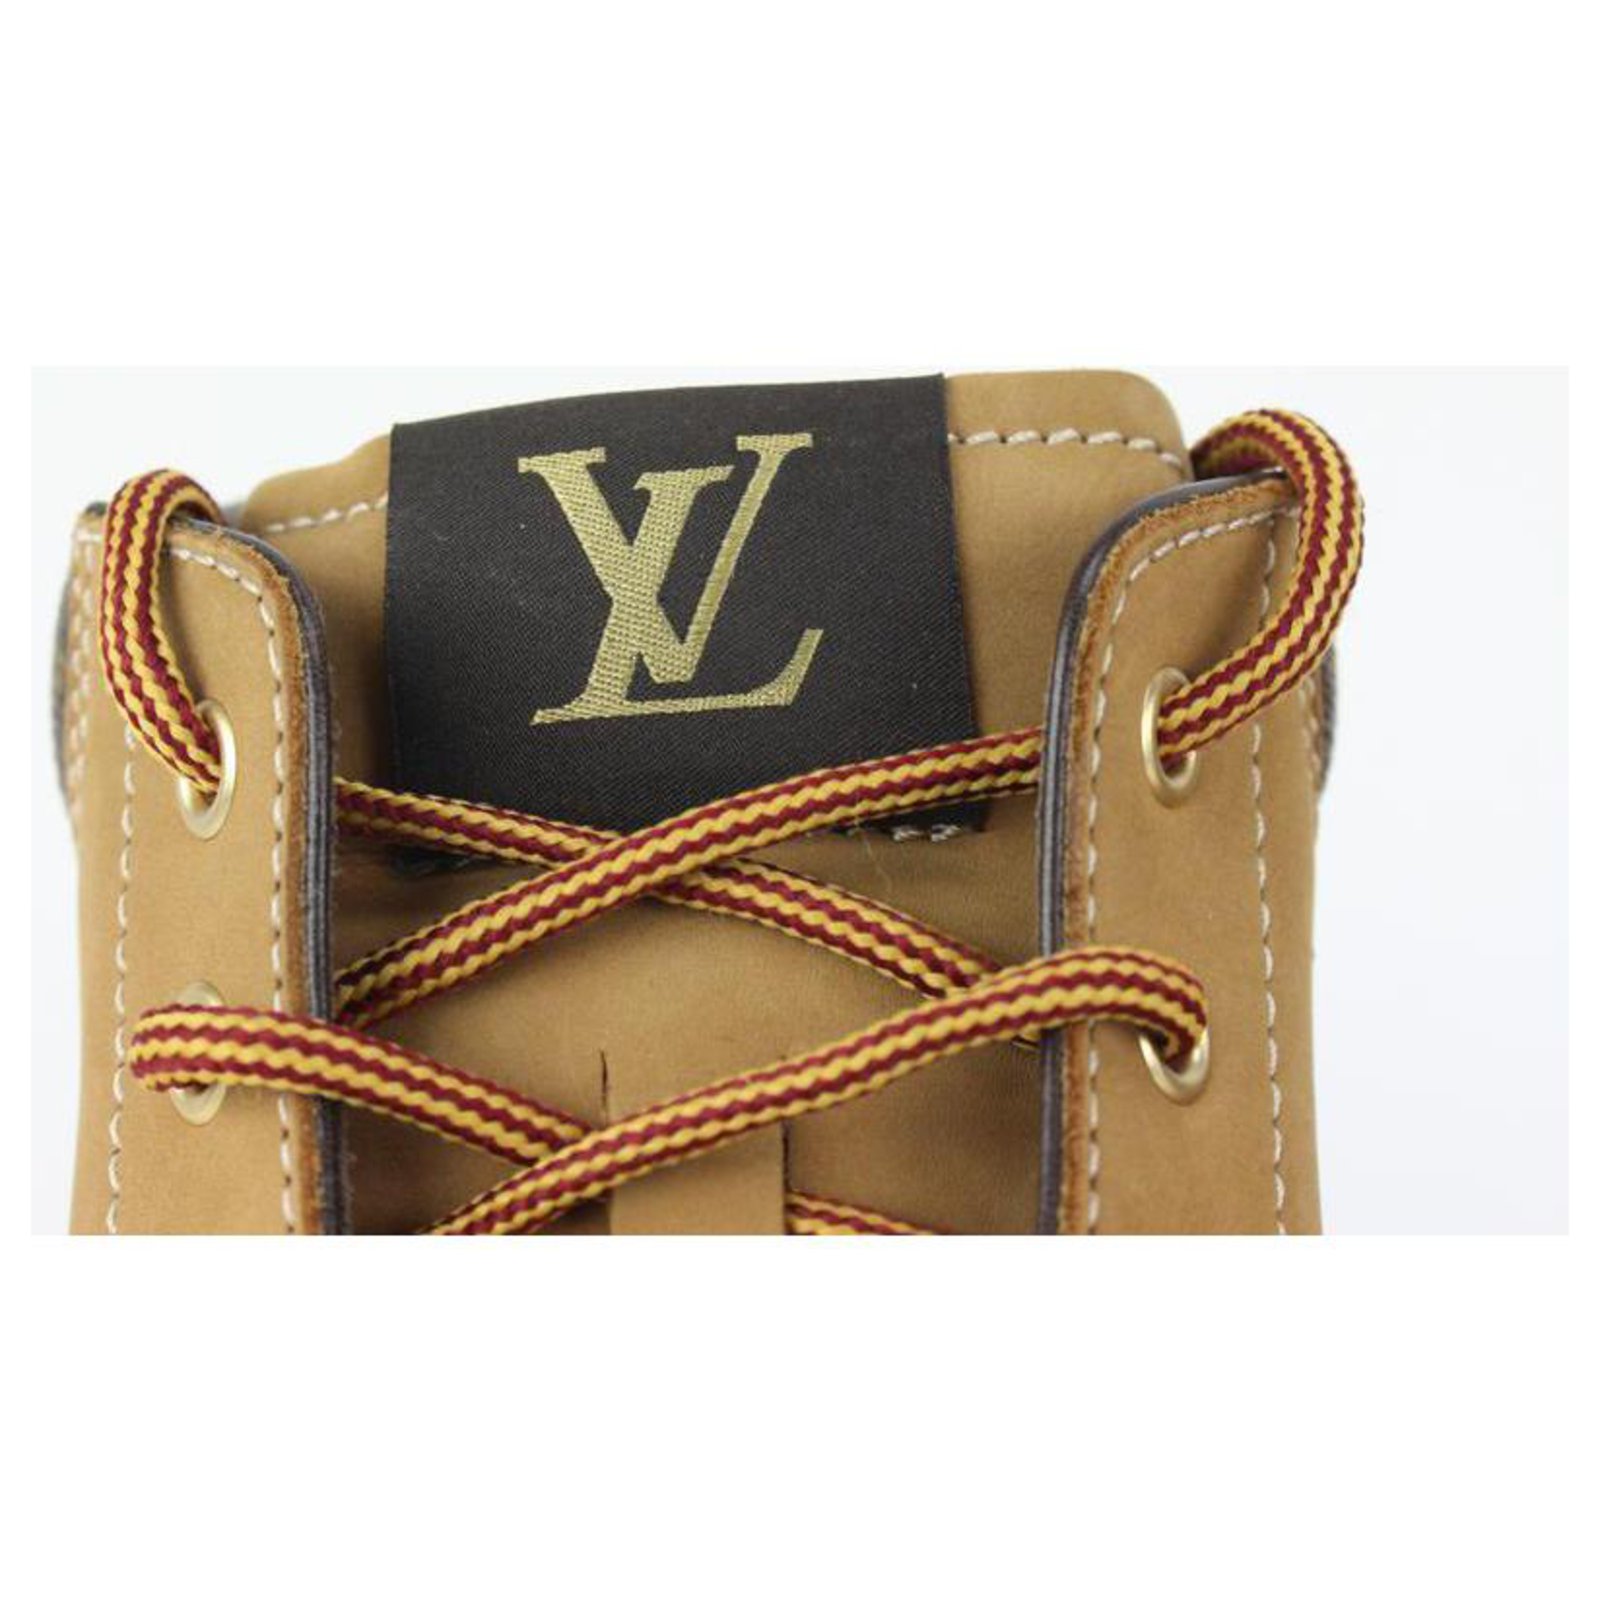 Louis Vuitton - Authenticated Oberkampf Boots - Leather Multicolour for Men, Very Good Condition